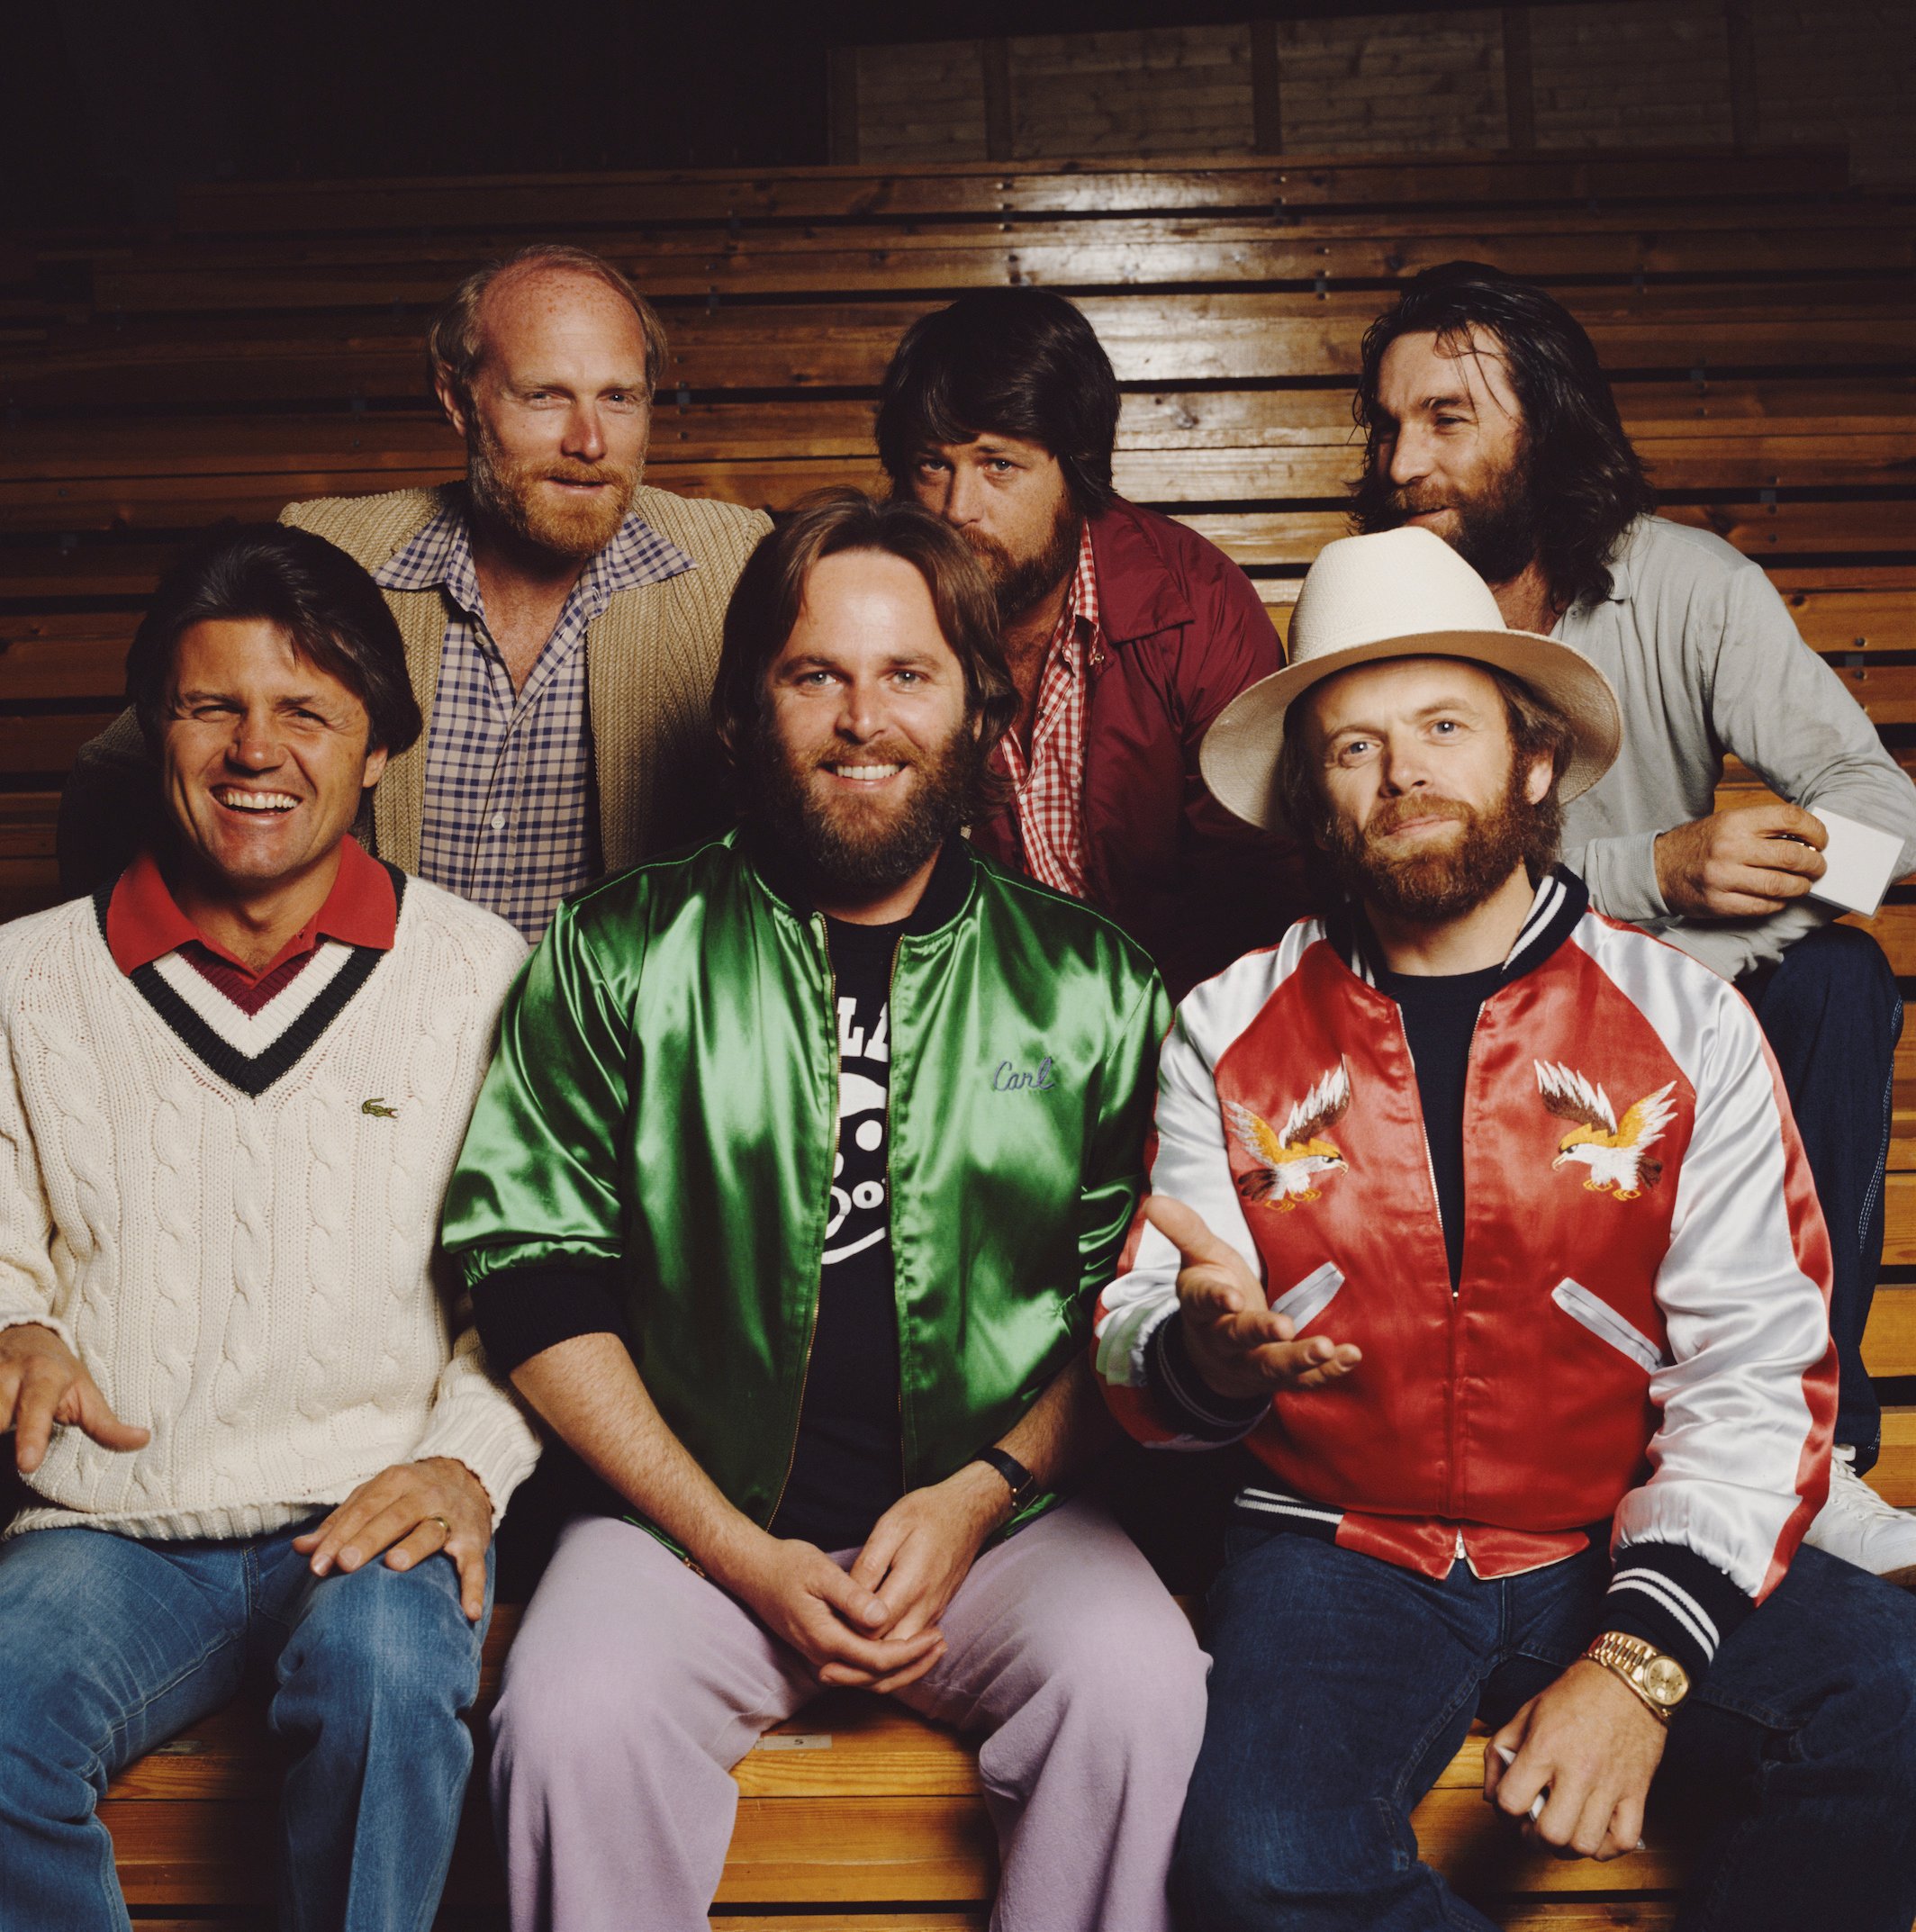 American rock and pop group The Beach Boys featuring members Mike Love, Brian Wilson, and Dennis Wilson, Bruce Johnston, Carl Wilson, and Al Jardine